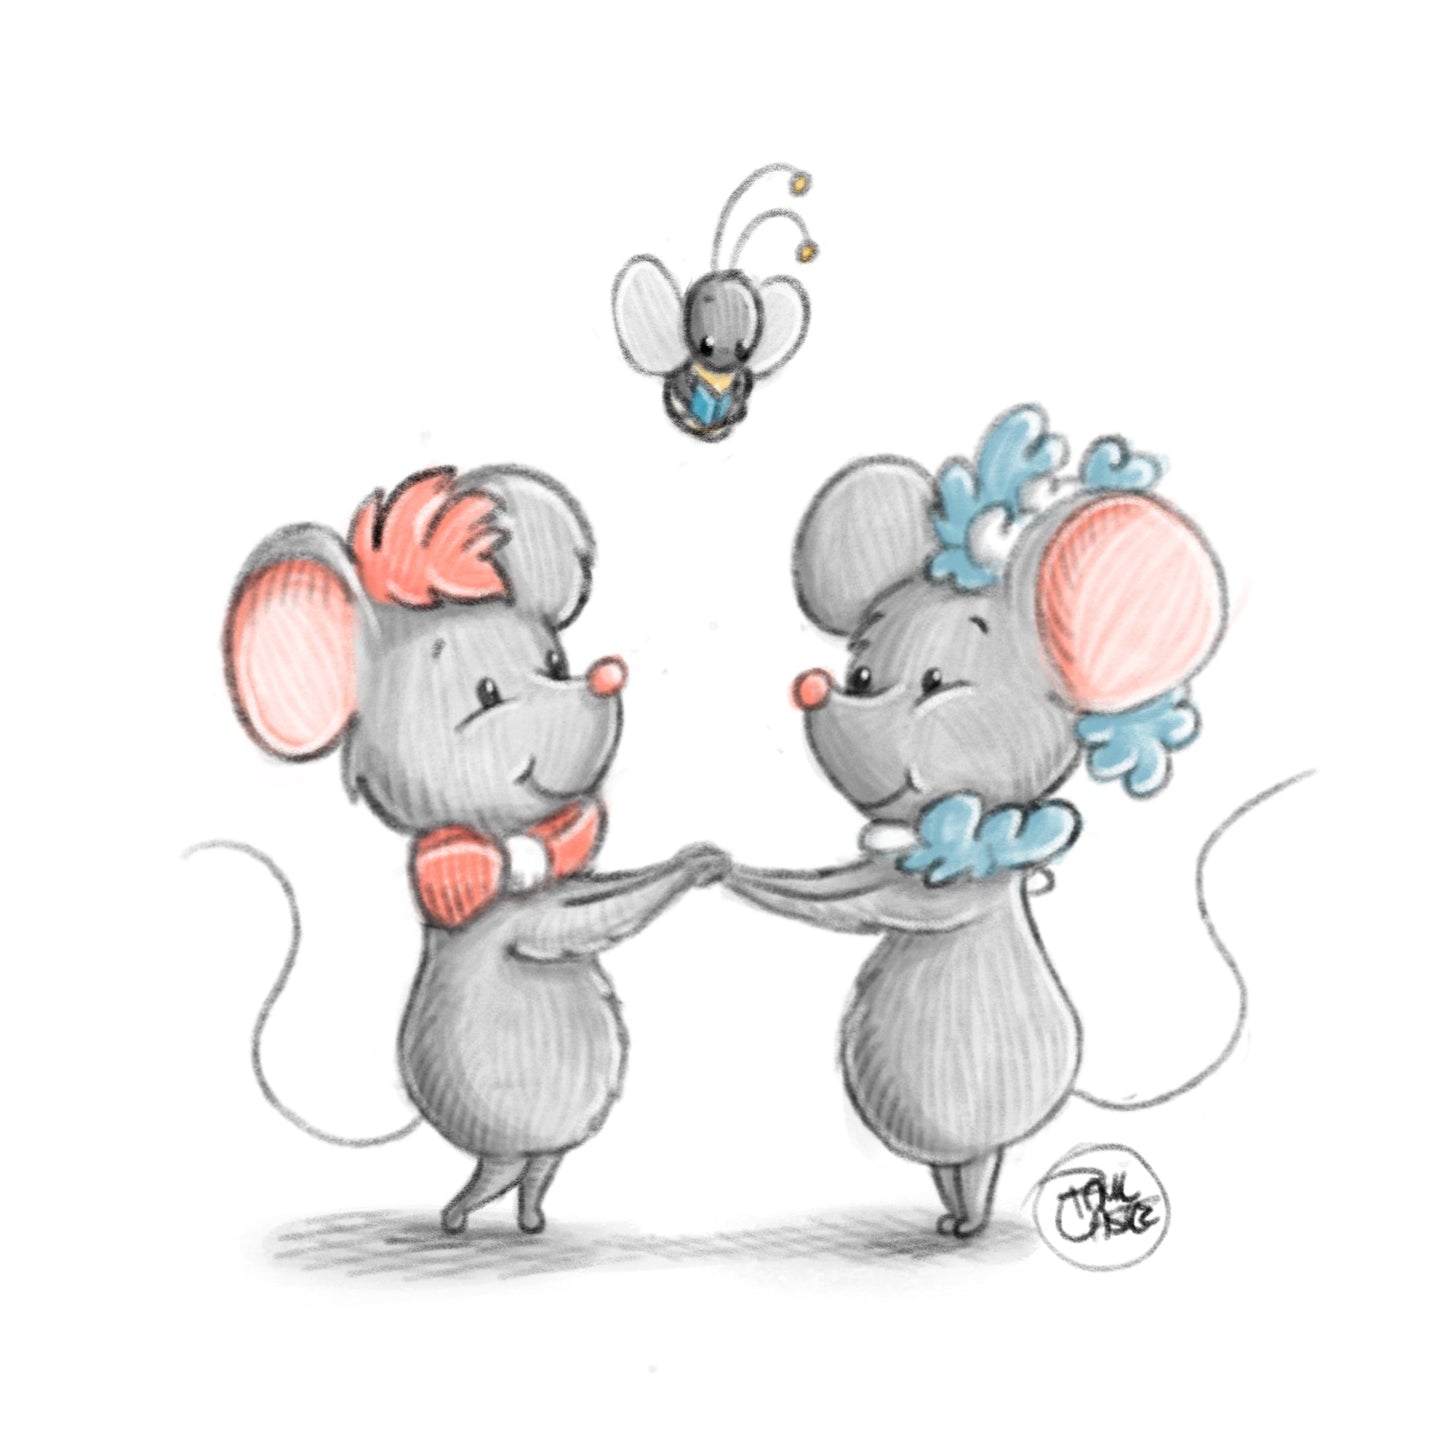 I Only Have Mice For You - Art Print - Paul Castle Studio